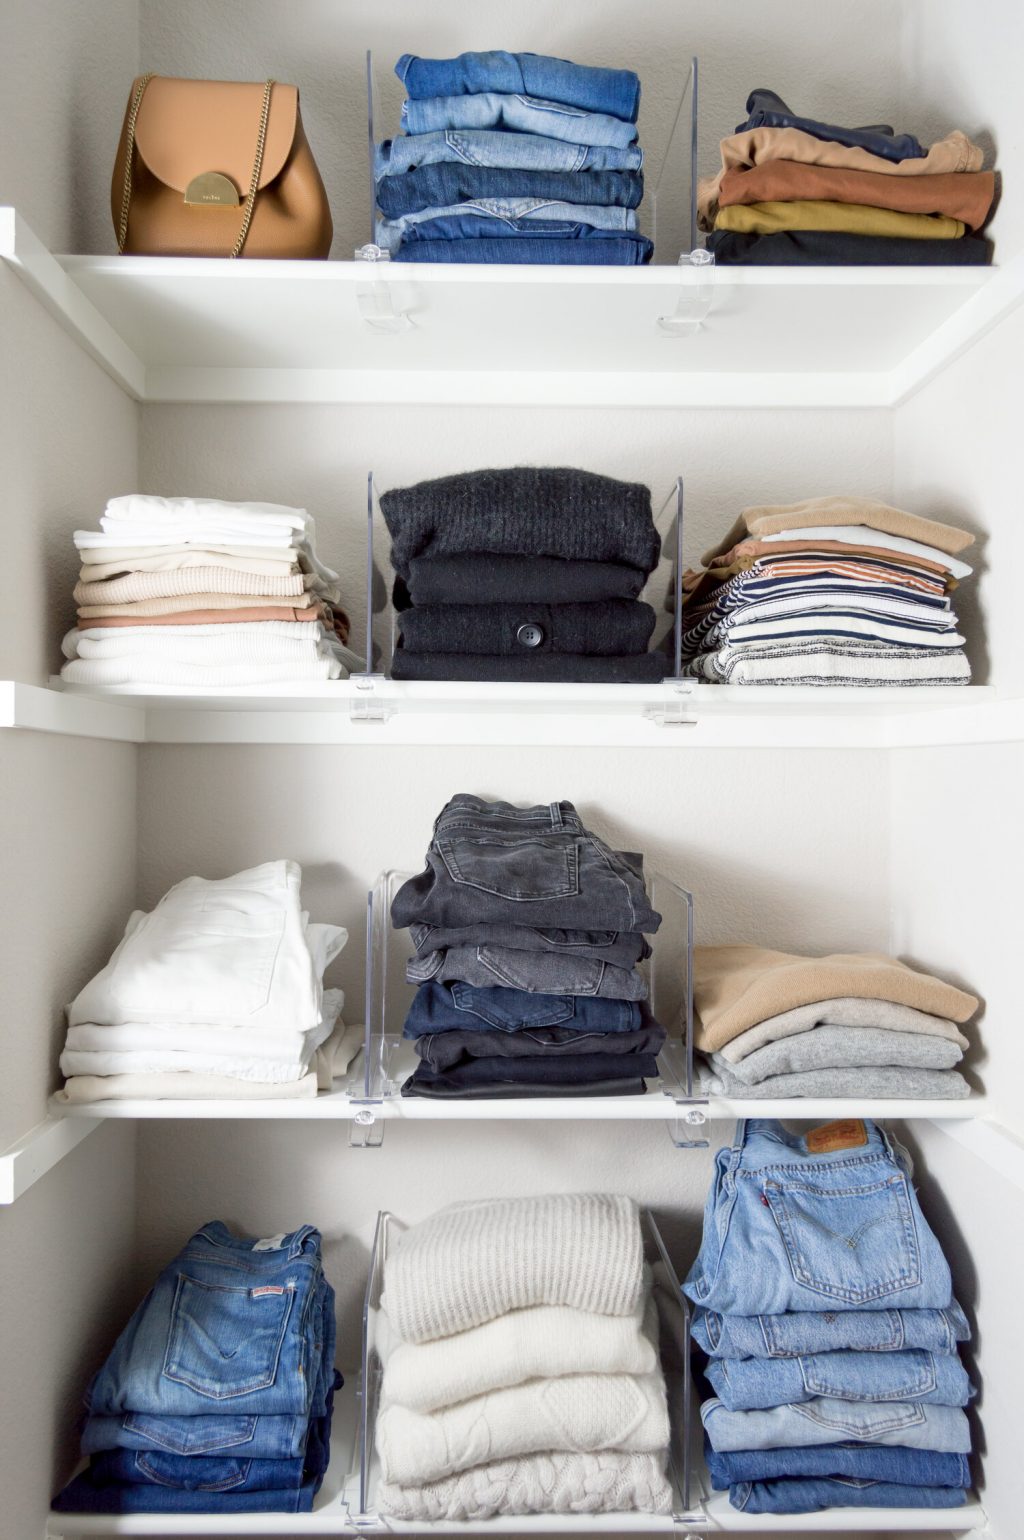 How To Organize Your Closet Like A Pro